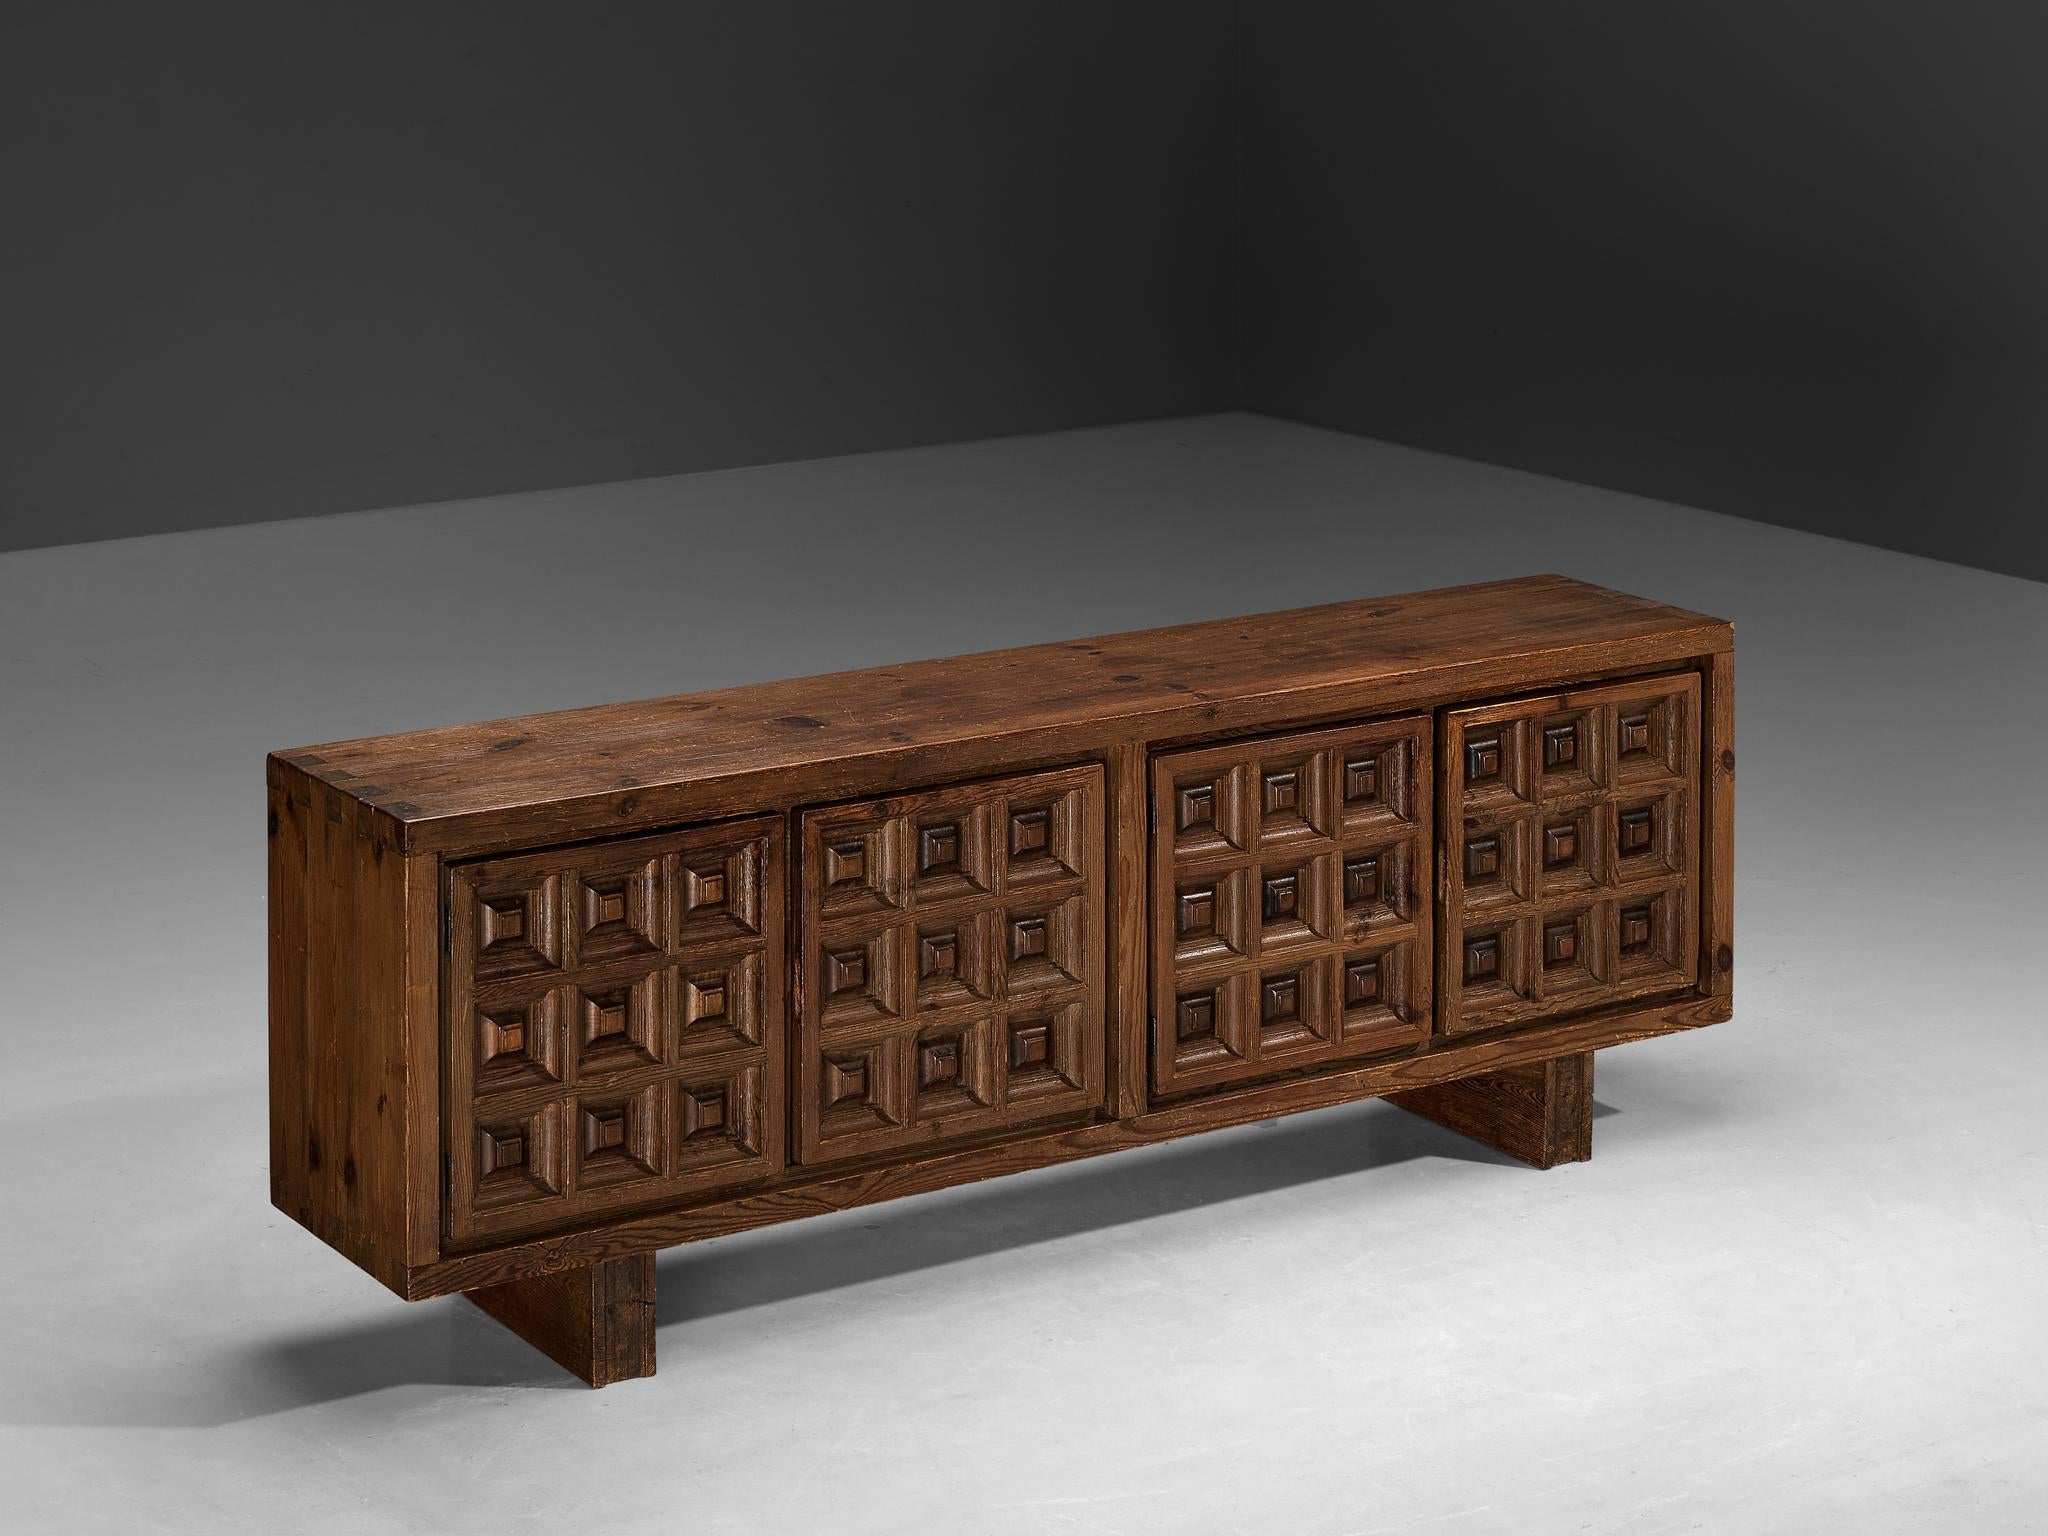 Biosca Spanish Sideboard in Stained Pine